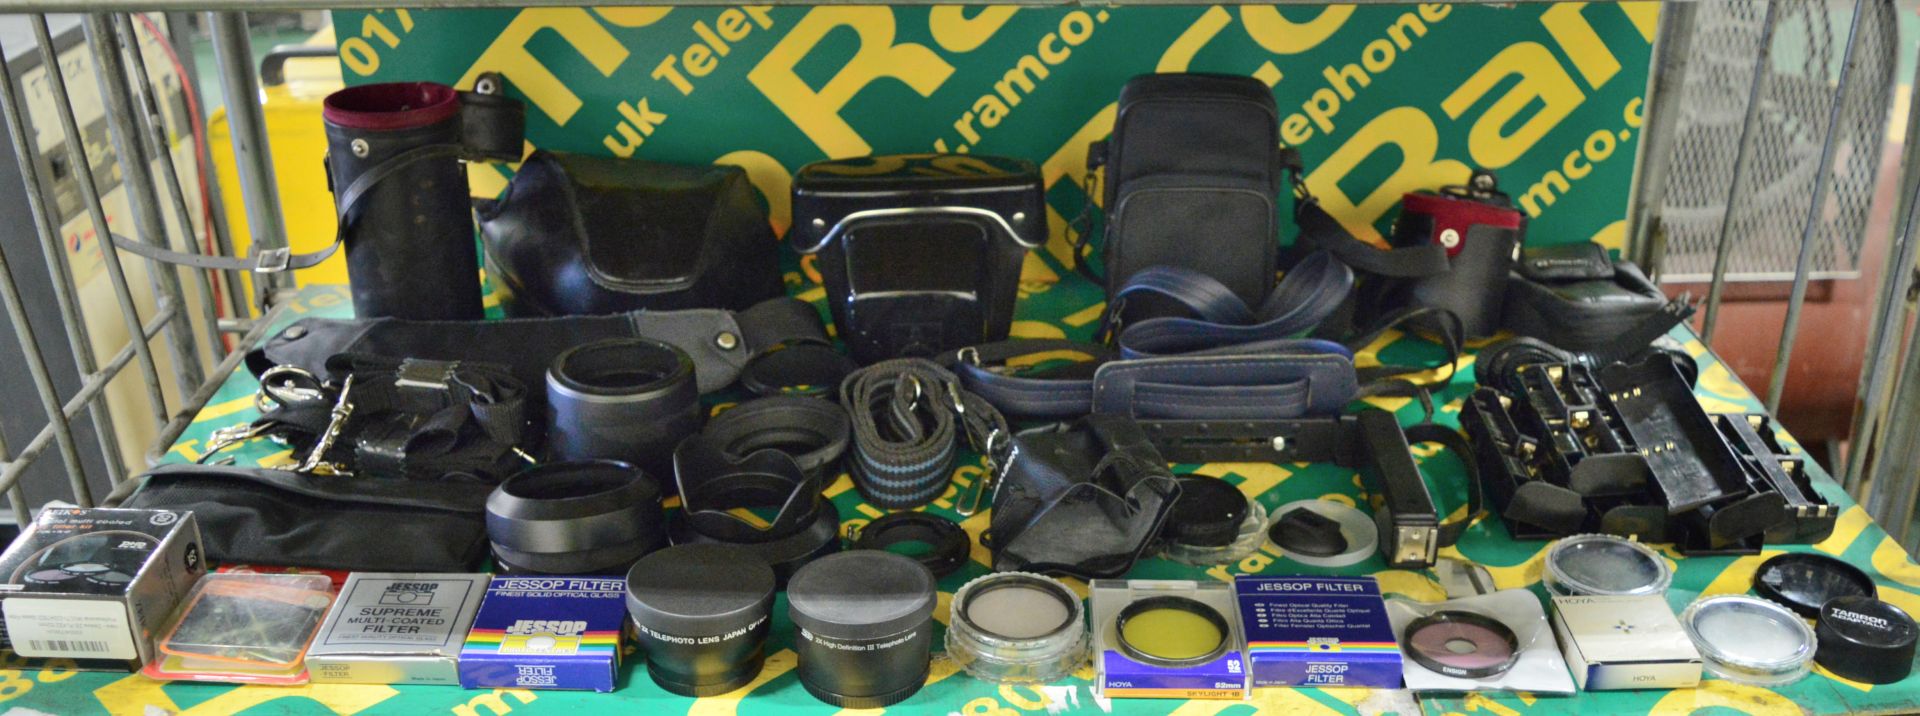 Camera Accessories inc Lenses, Cases, Battery Trays, Filters, Straps.